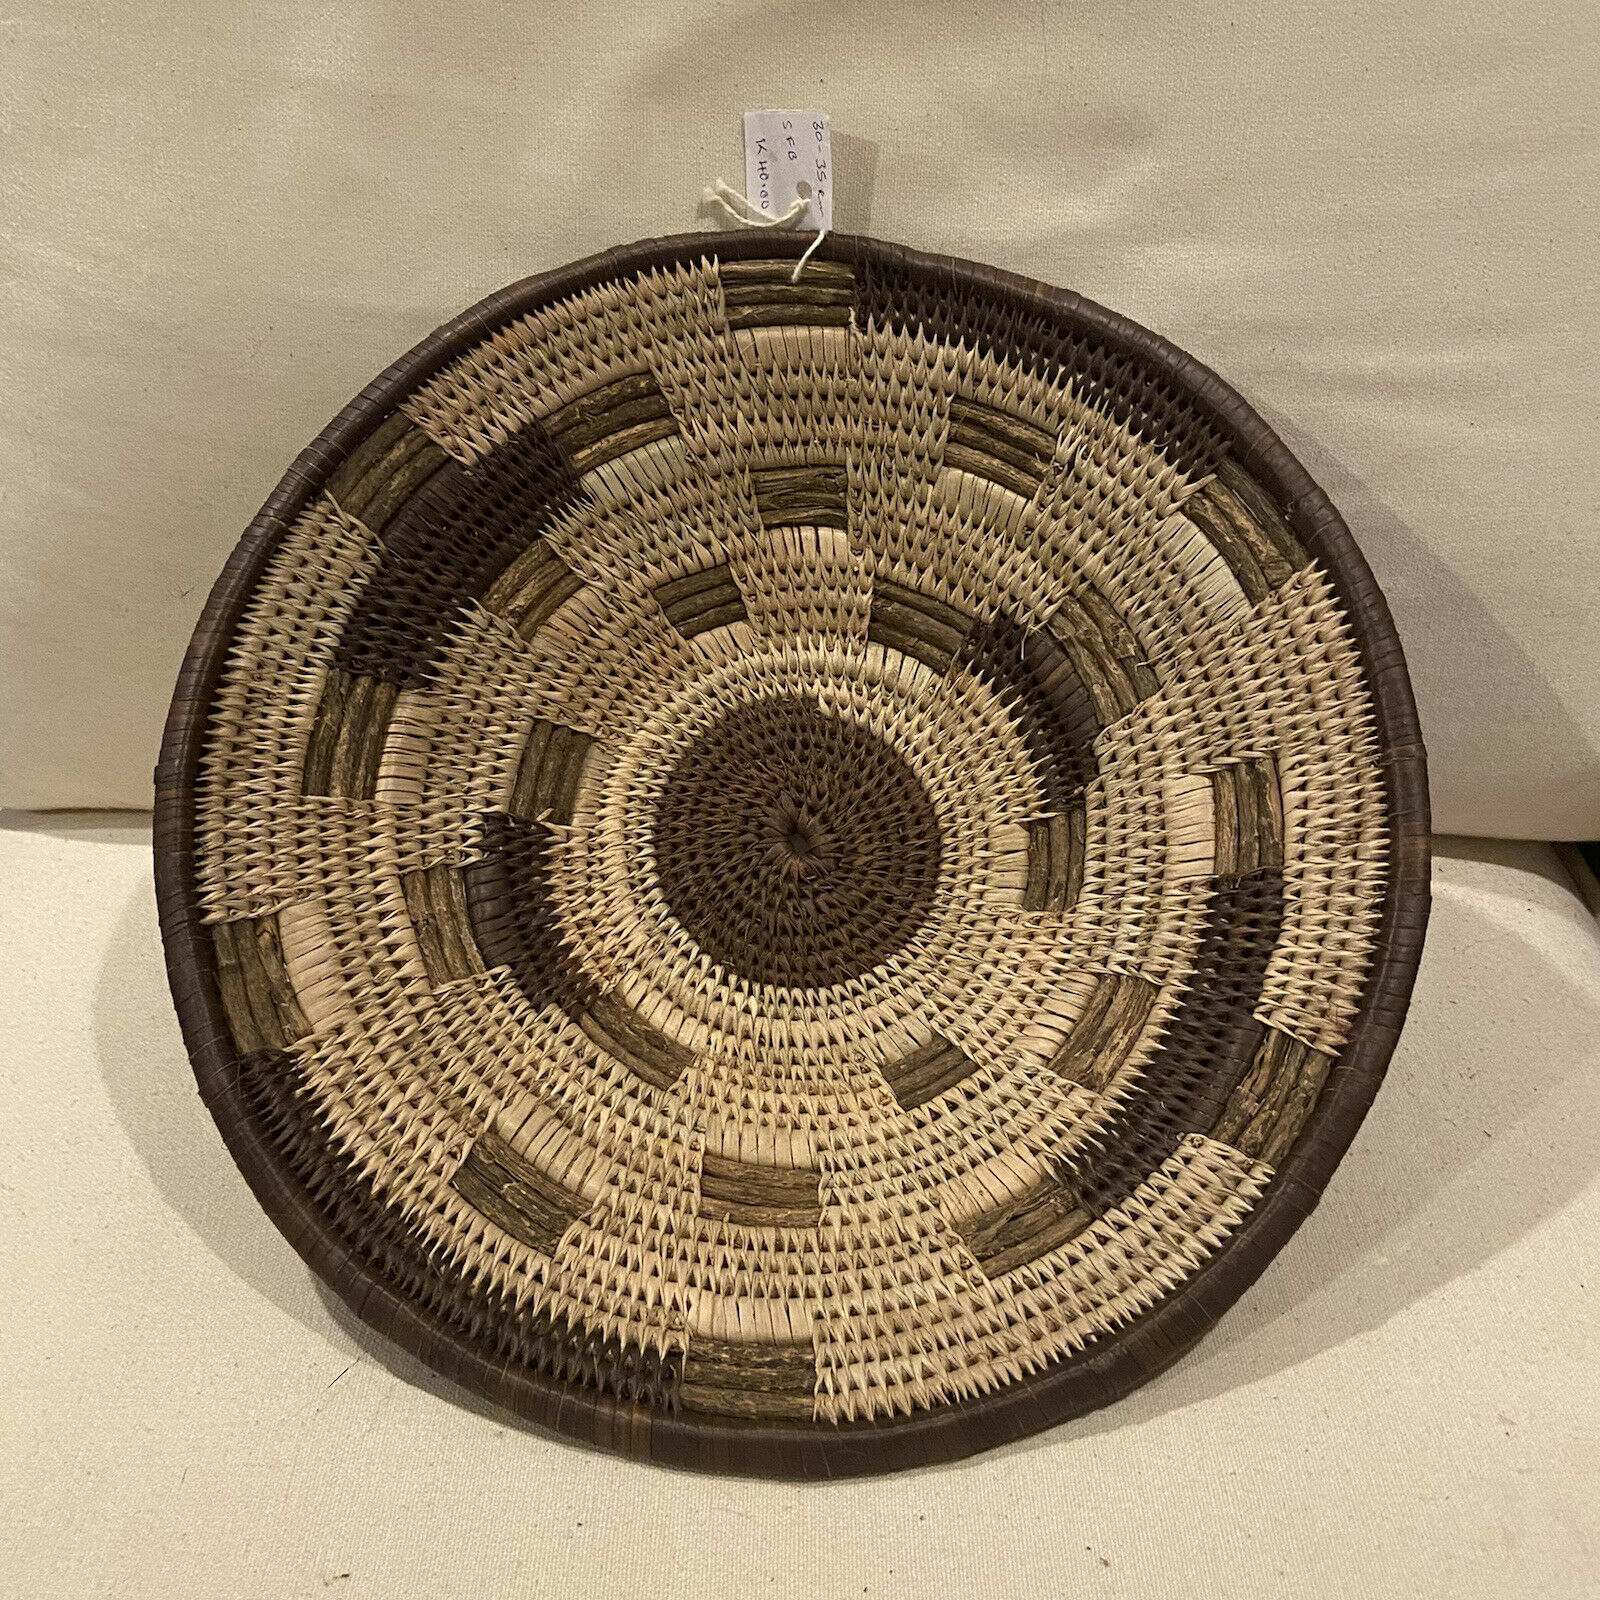 Zambia, Africa Basket. Wall (hanger Attached) 13” Wide, 3” Tall. Makenge Tribe